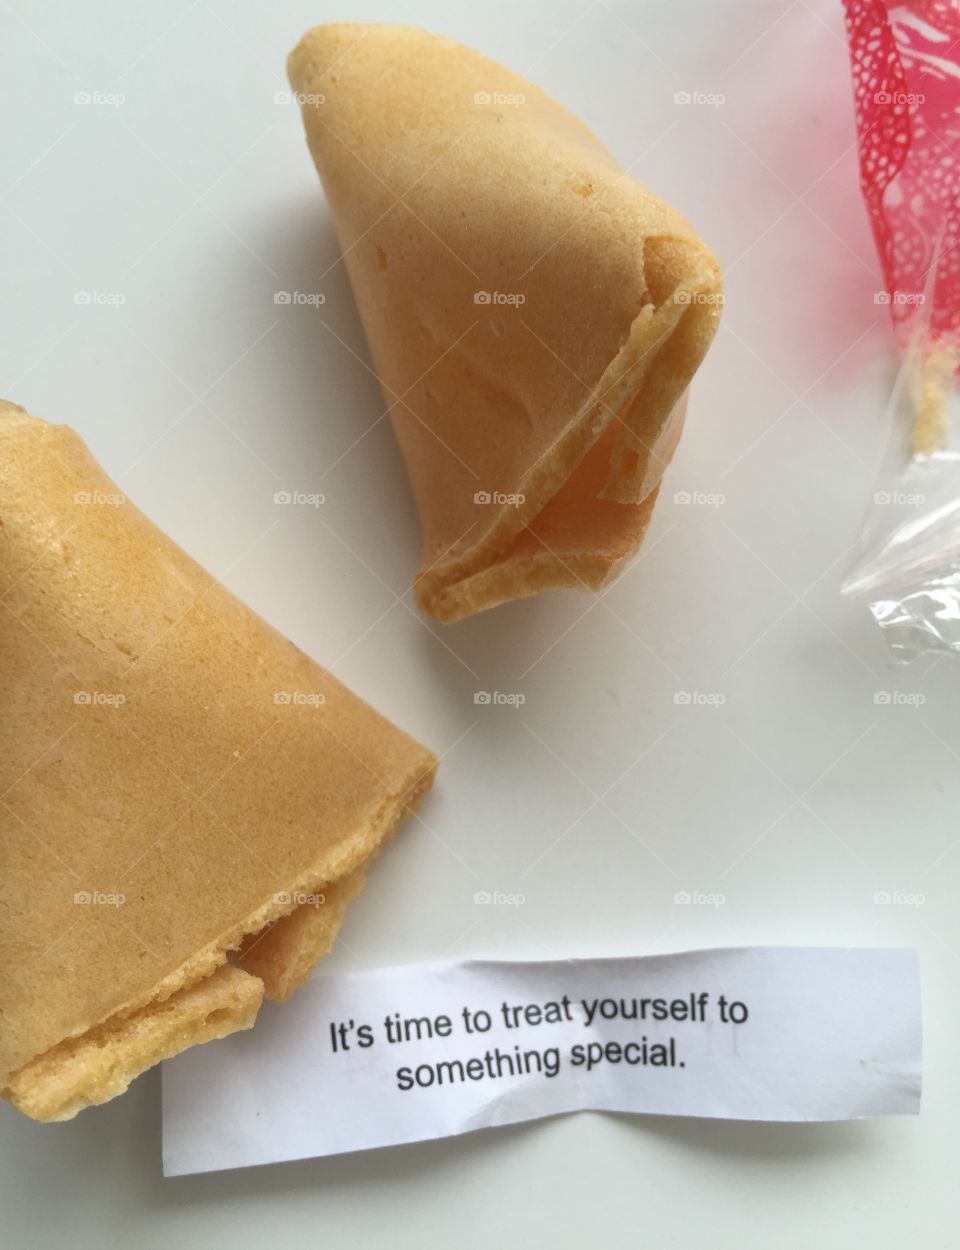 Fortune cookie. Time to treat yourself to something special. Fortune cookie message. 